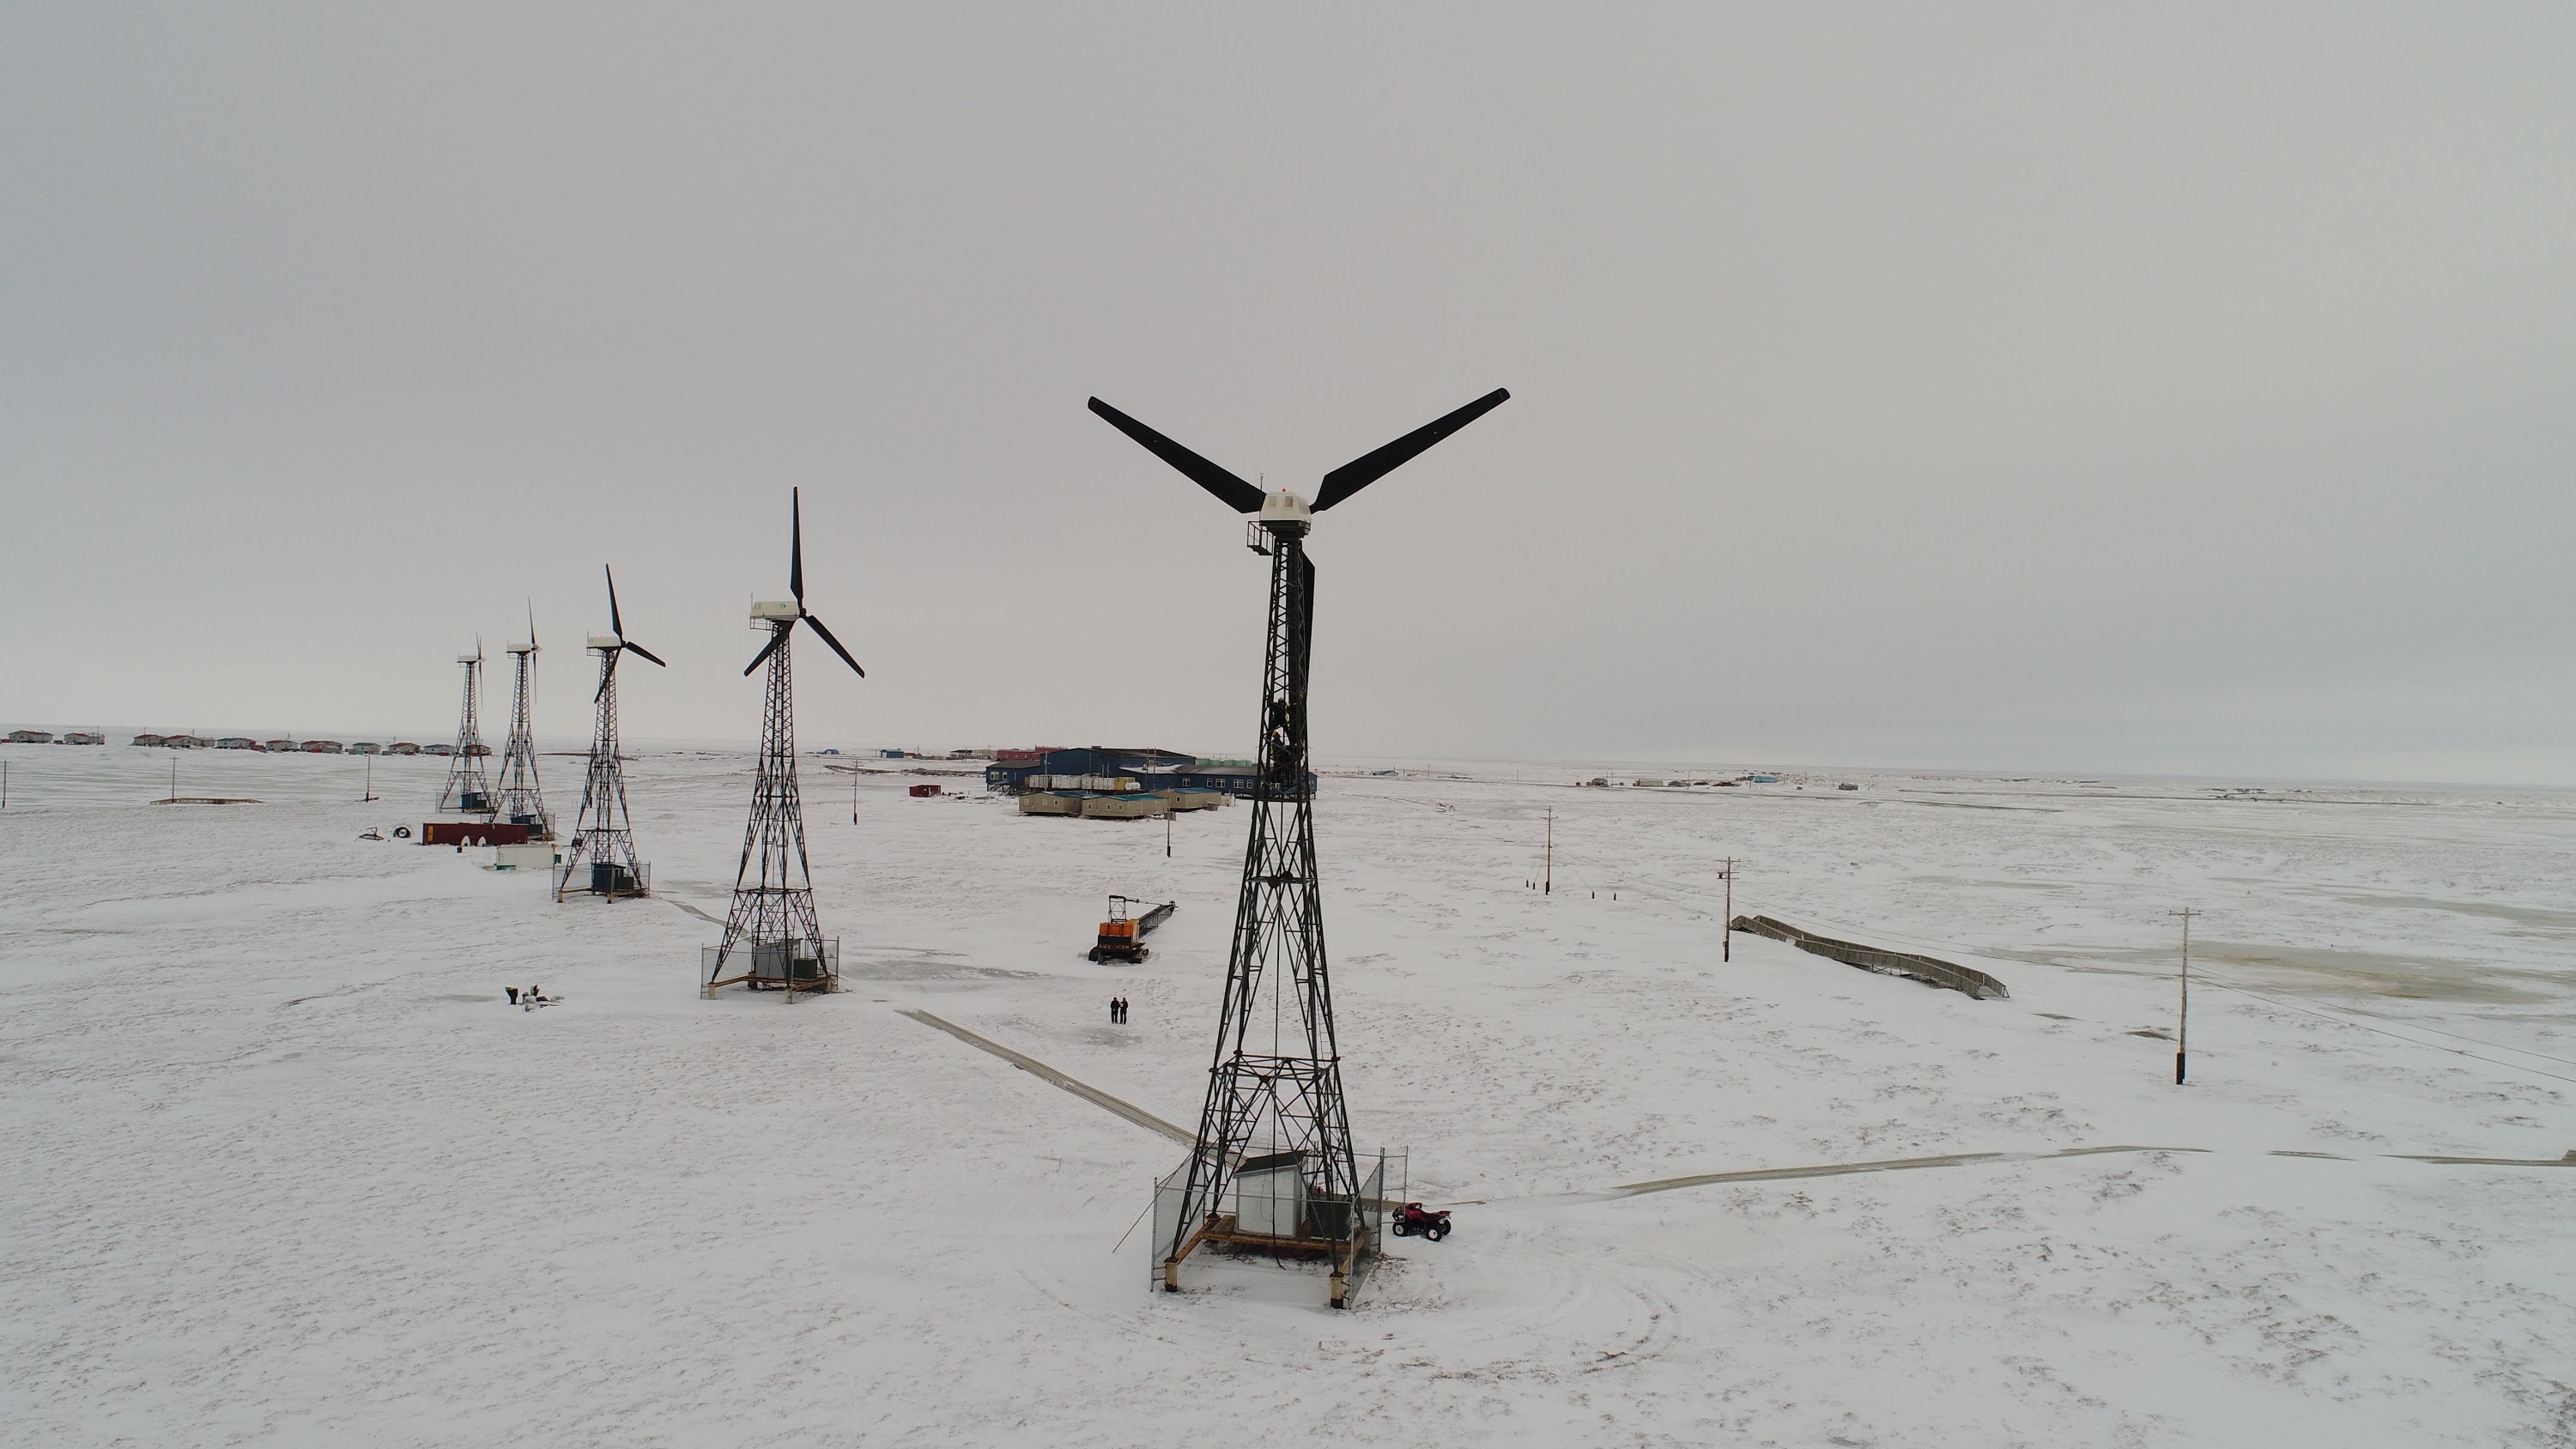 Wind Resources in Conjunction with Dispatchable Loads Explored for Alaska Microgrid